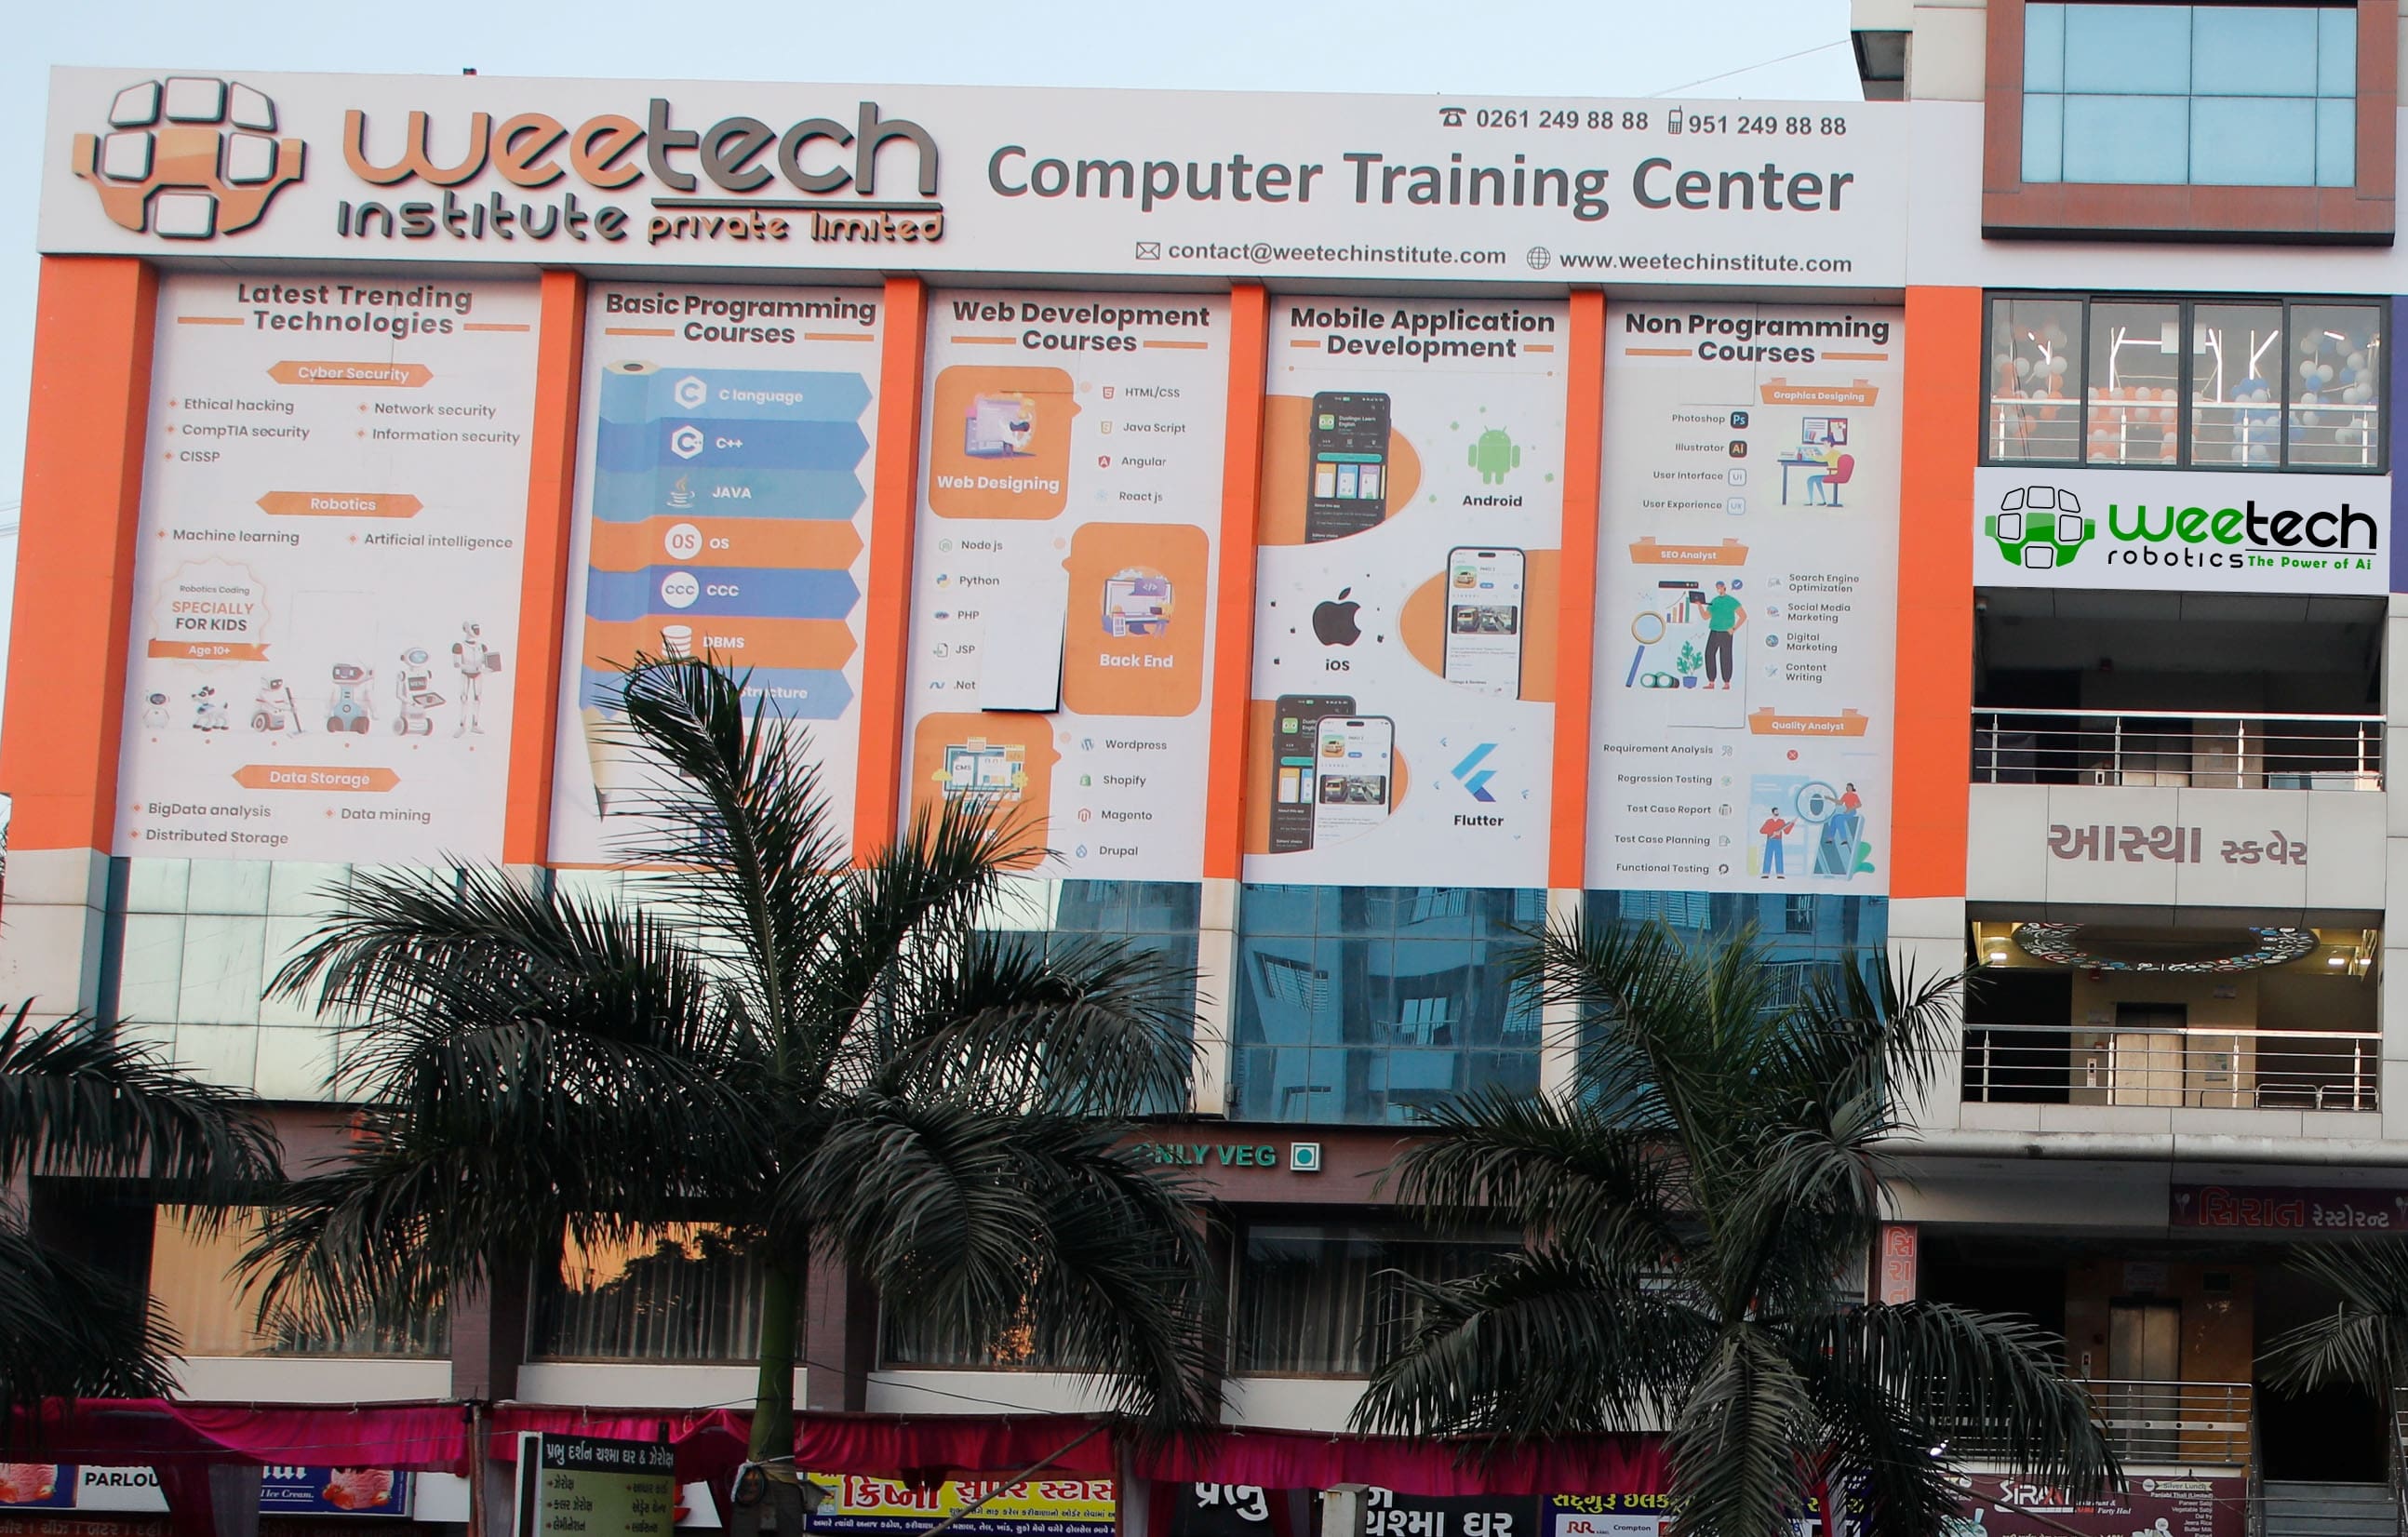 WeeTech Institute Private Limited